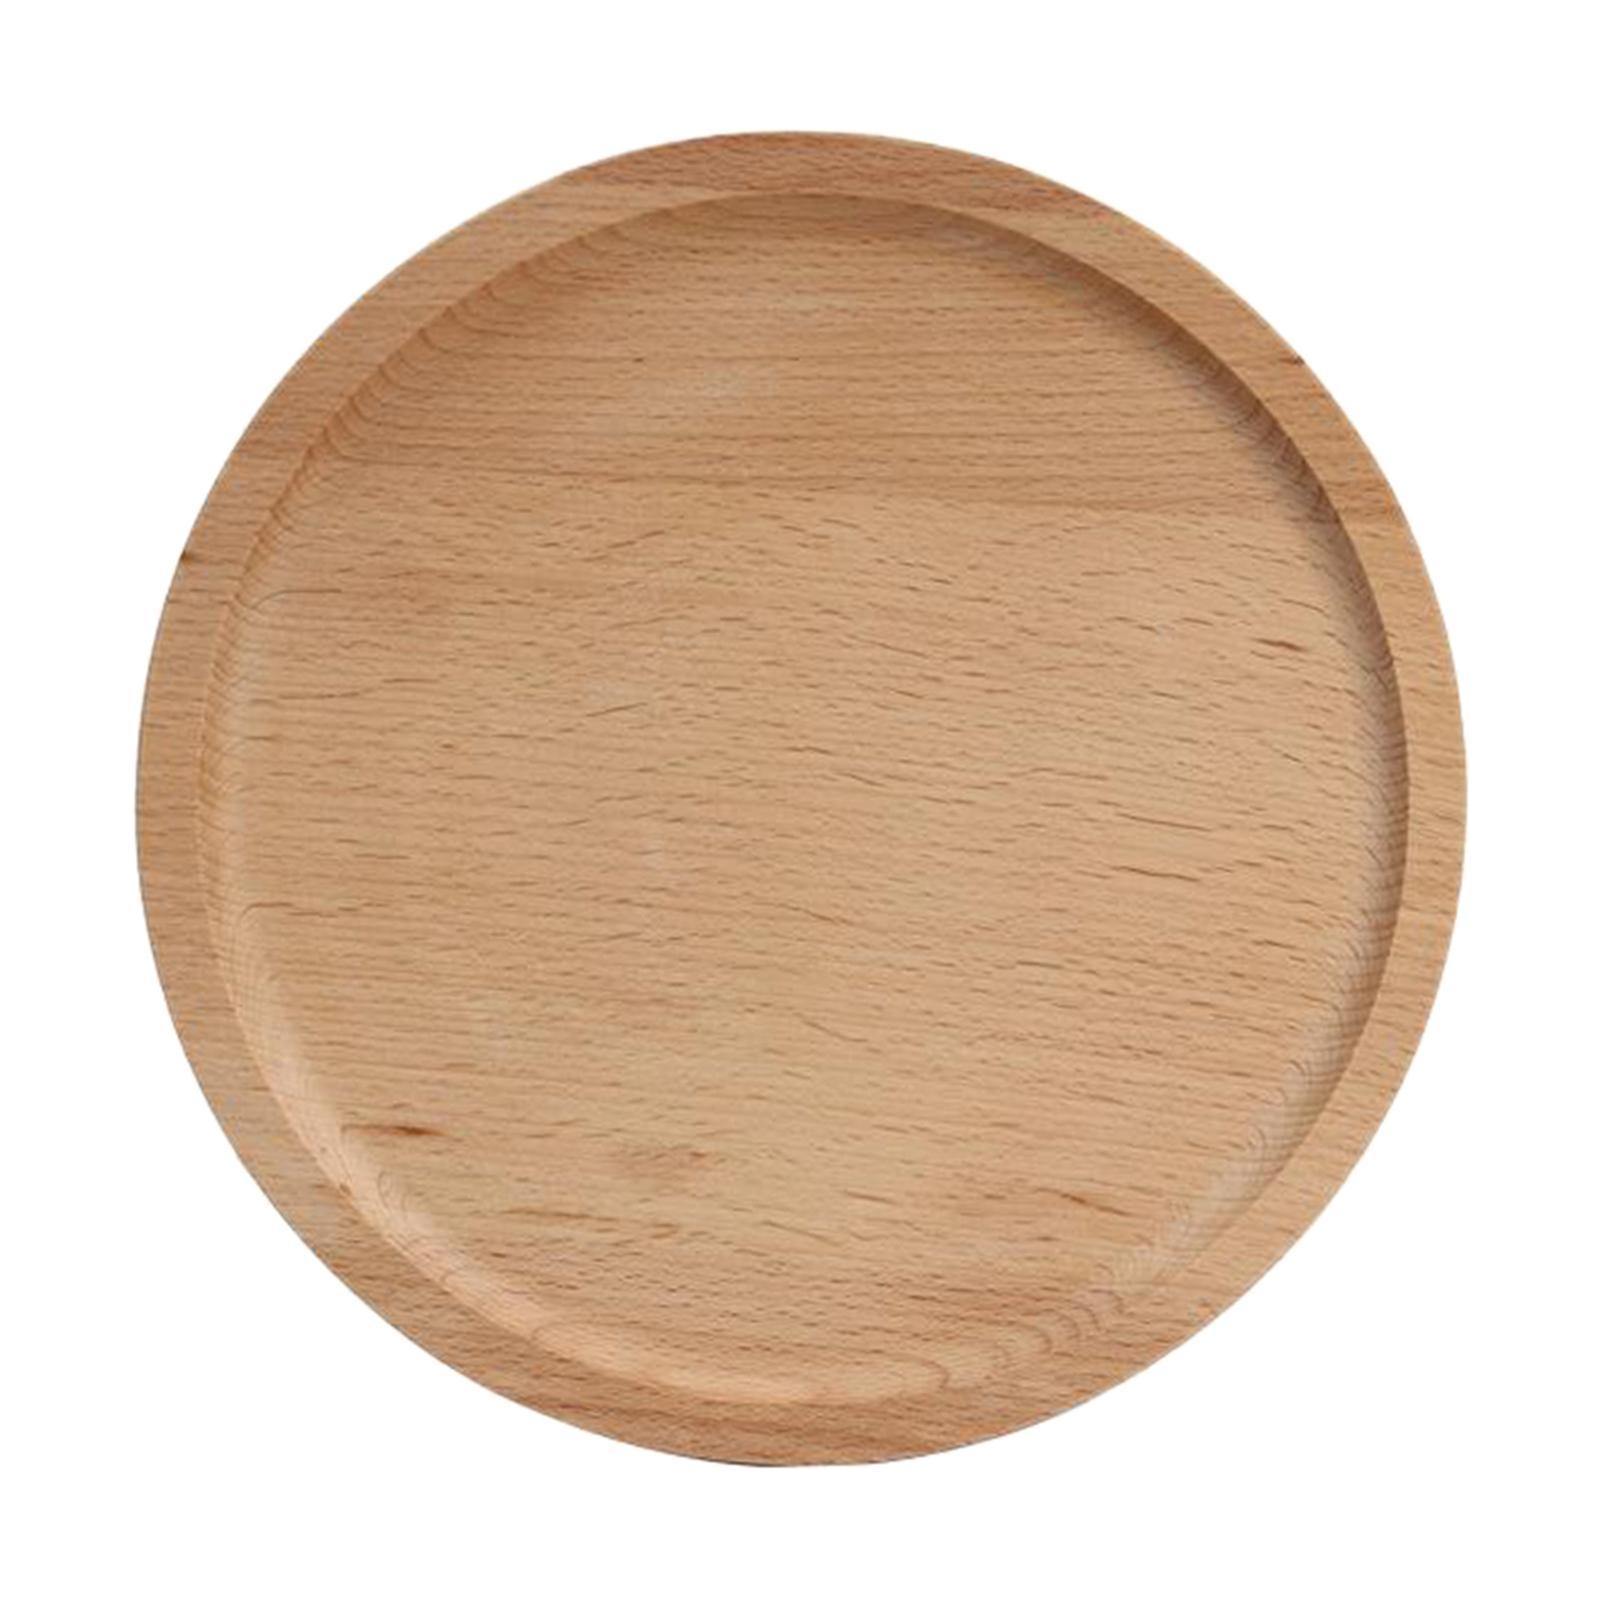 Wood Plate Wooden Tray Dessert  Dishes Dinner